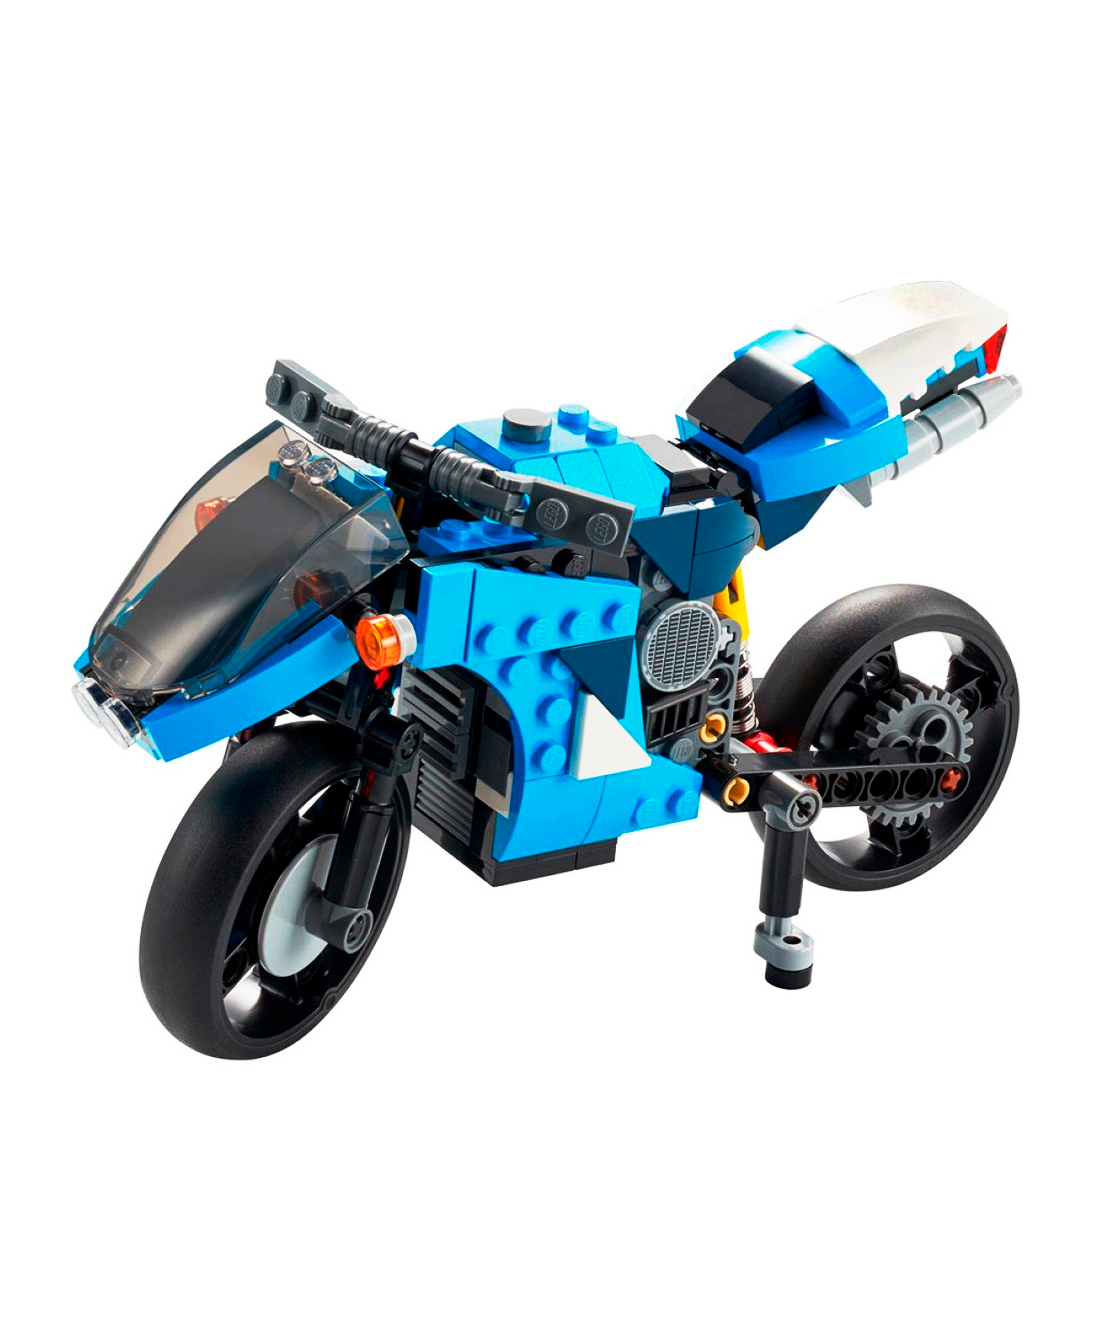 Motorcycle constructor